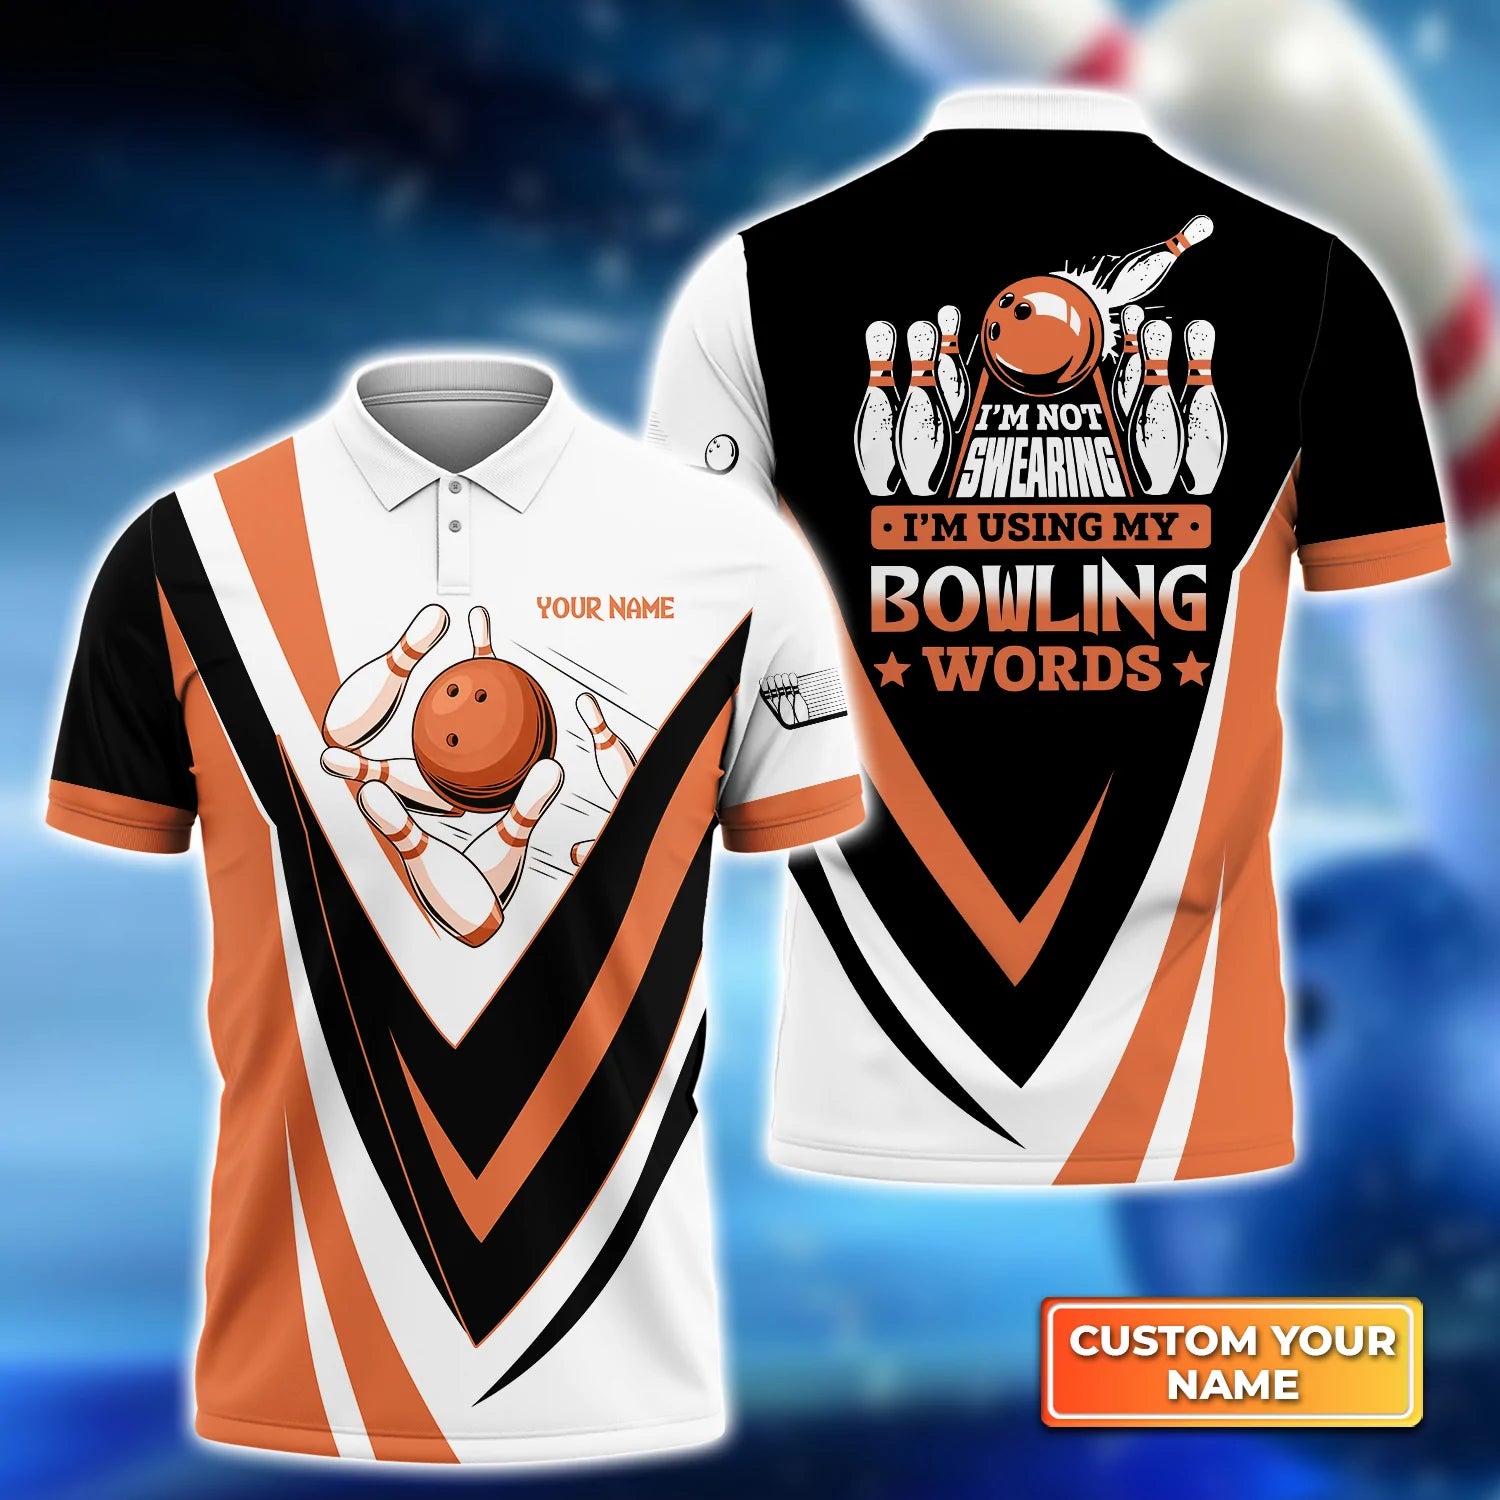 Polo Shirt for Men’s Bowling Team with 3D Bowling Ball Design – Perfect Gift for Bowlers and Sports Enthusiasts – BP021